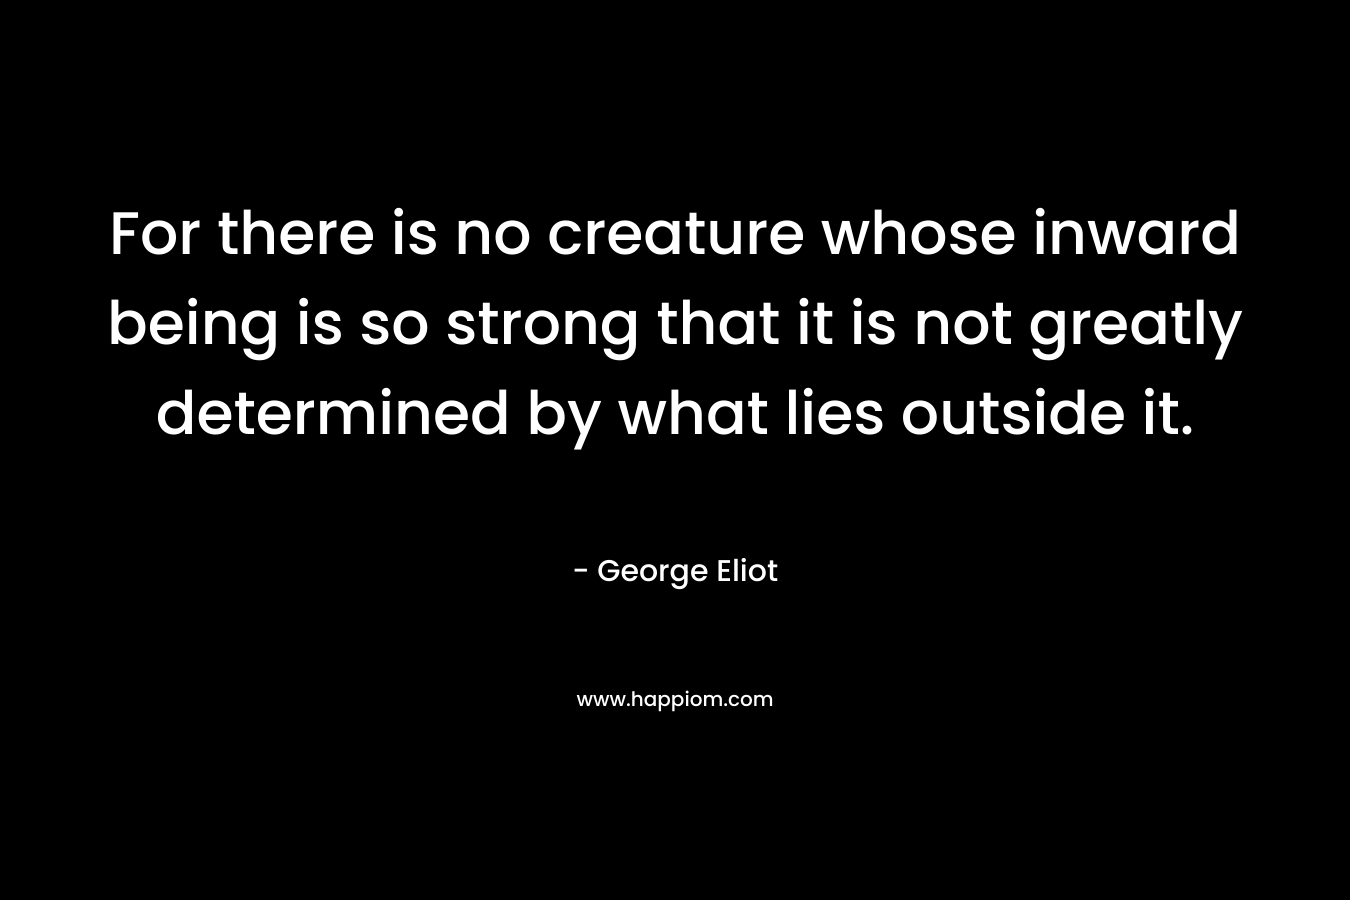 For there is no creature whose inward being is so strong that it is not greatly determined by what lies outside it.